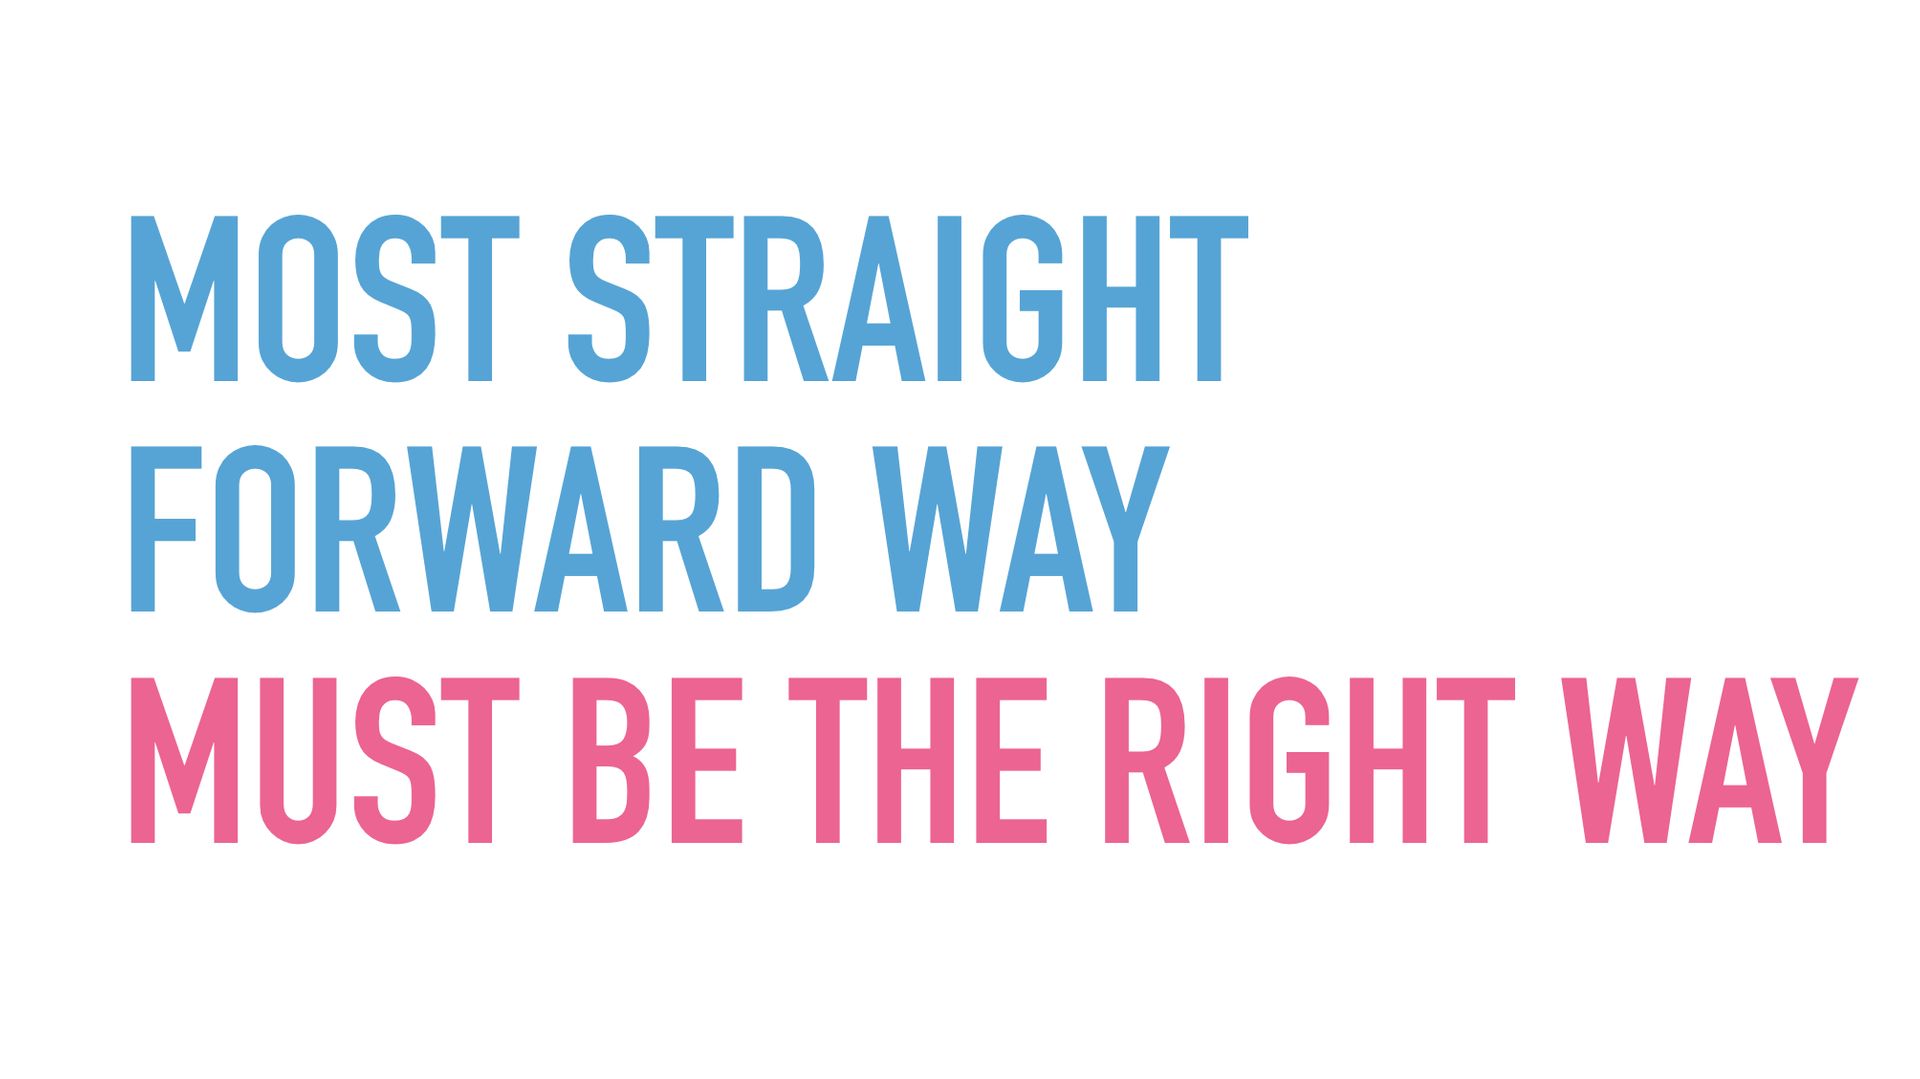 Slide text: Most straightforward way must be the right way.